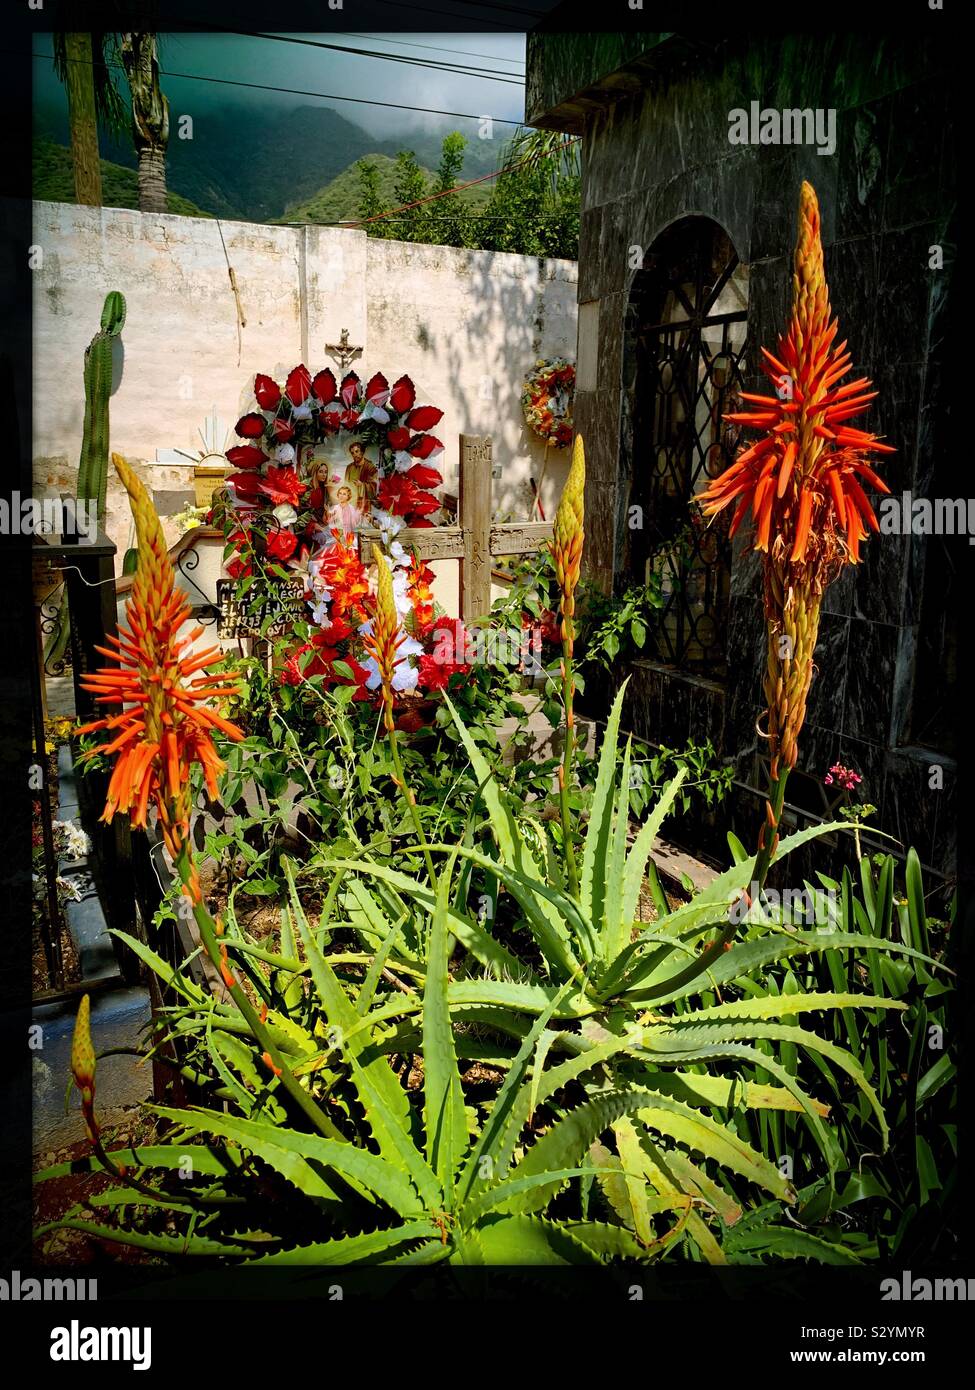 Living plants flourish on this grave in Mexico and an artificial floral arrangement adds even more color to honor the life of a loved one. Stock Photo